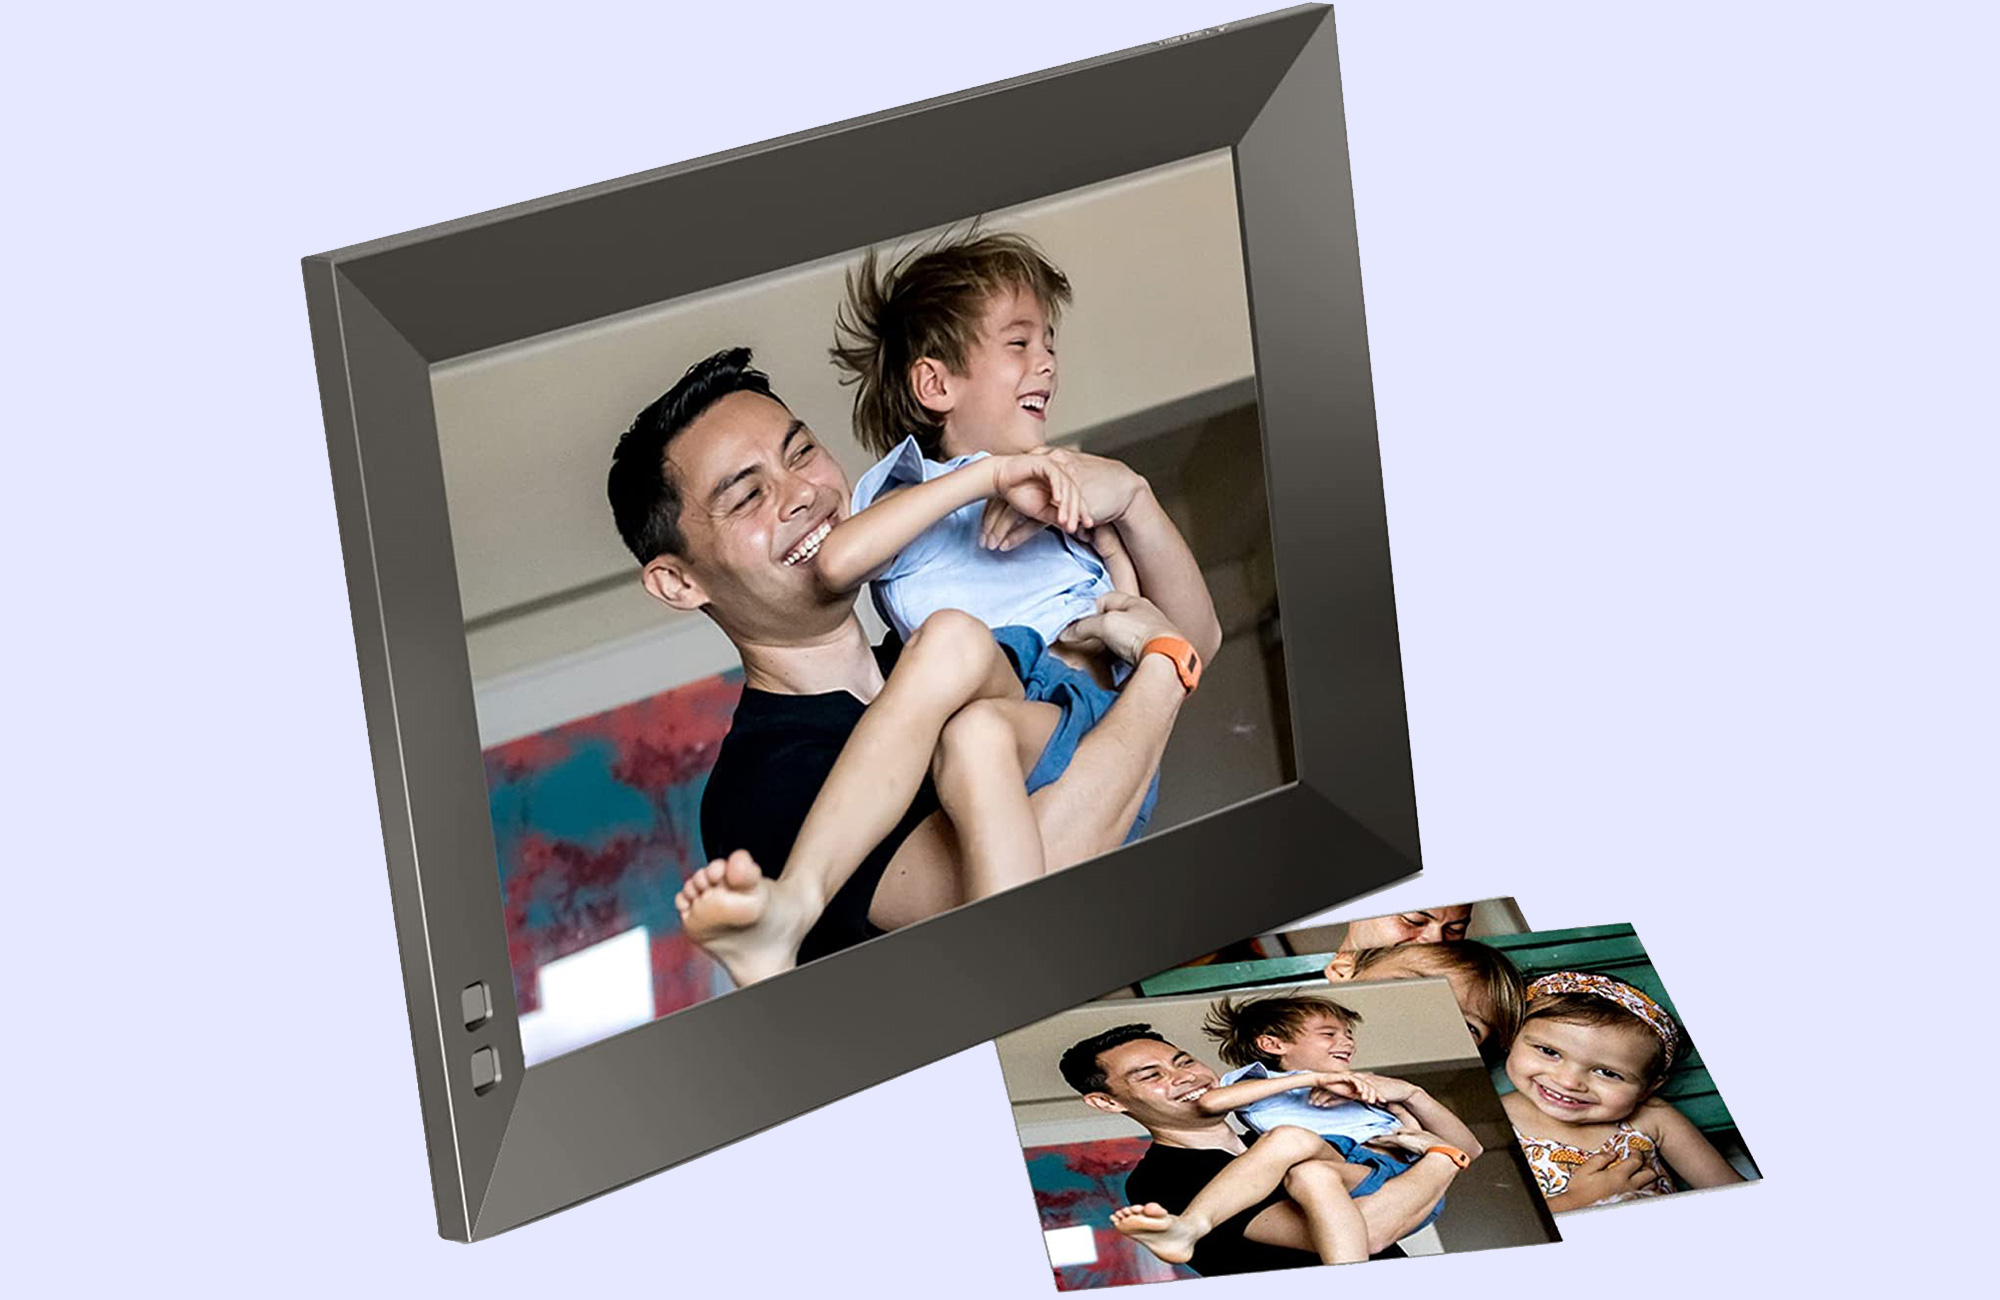 Cyber Monday deal: Save $78 on this Nixplay digital picture frame